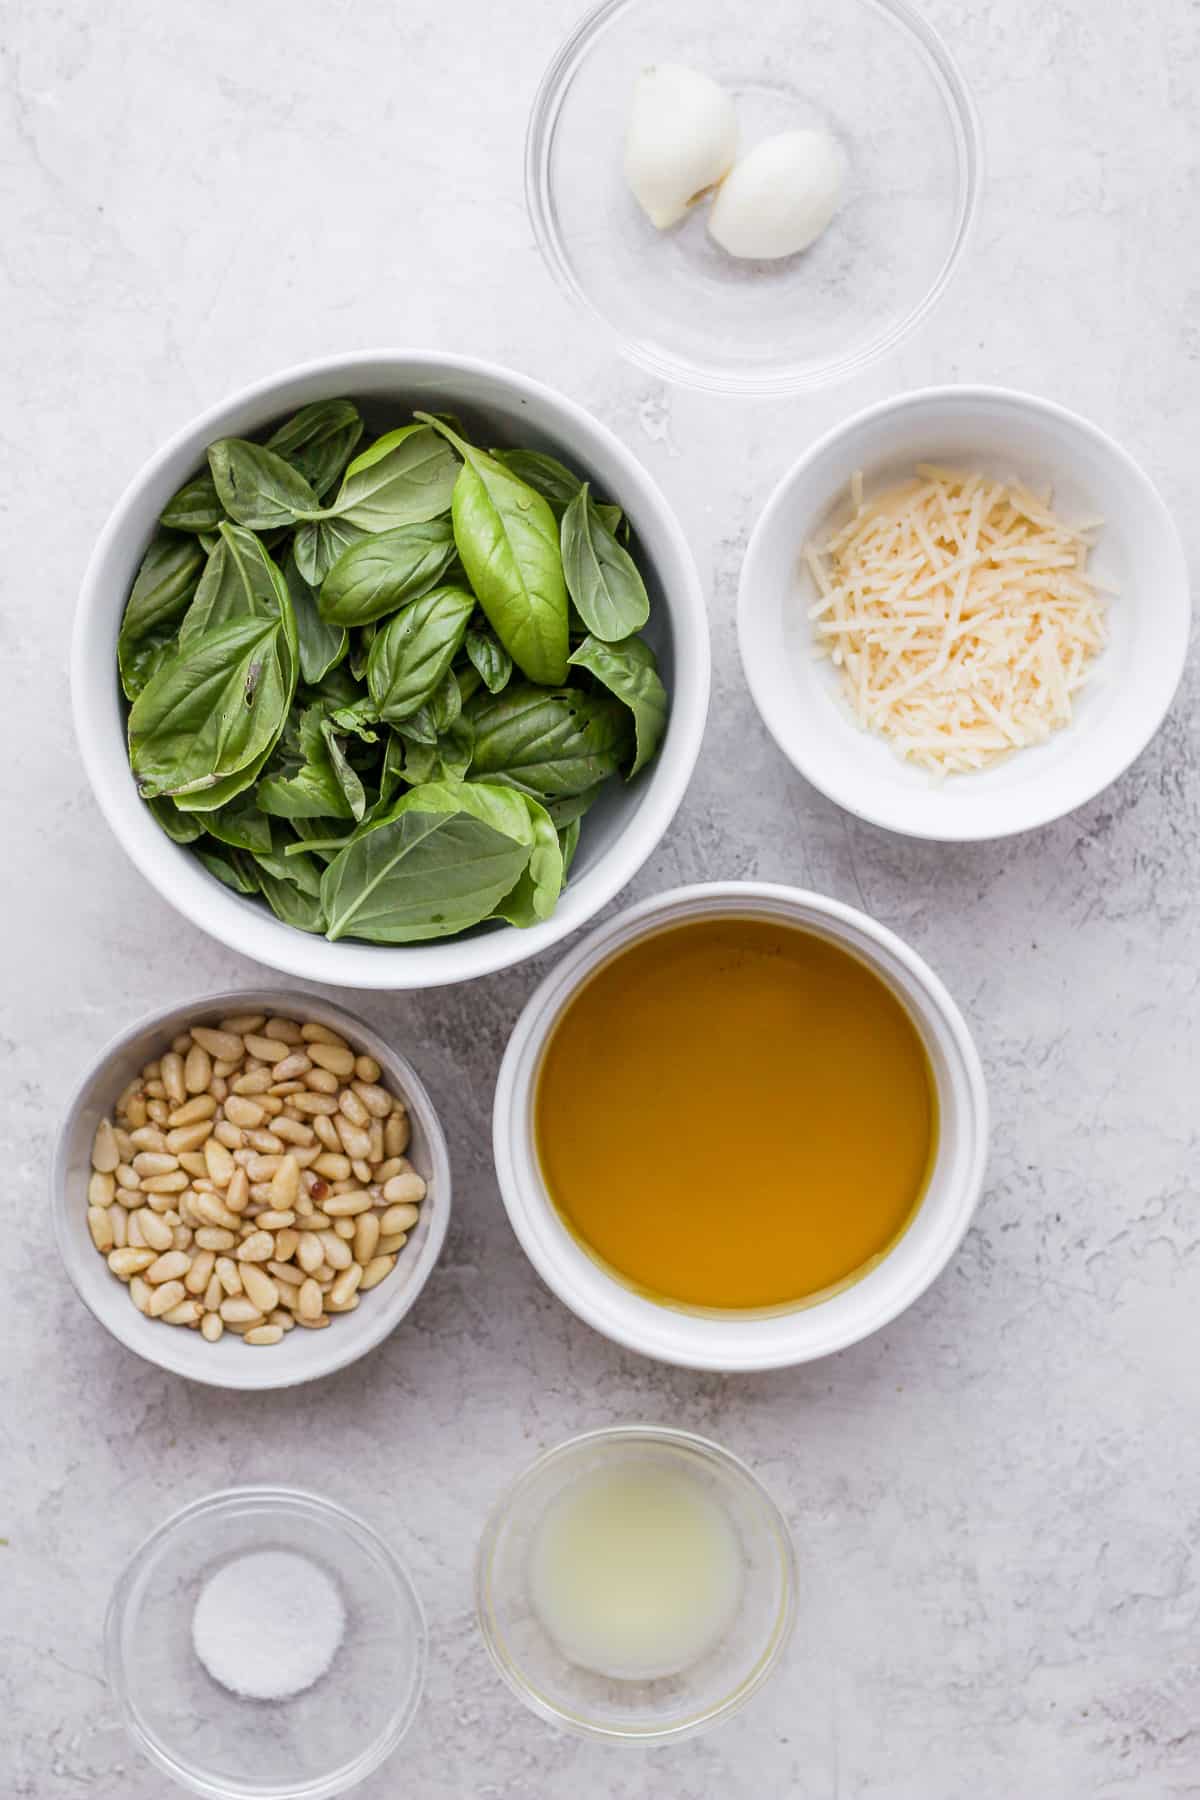 Ingredients to make the recipe all in individual bowls